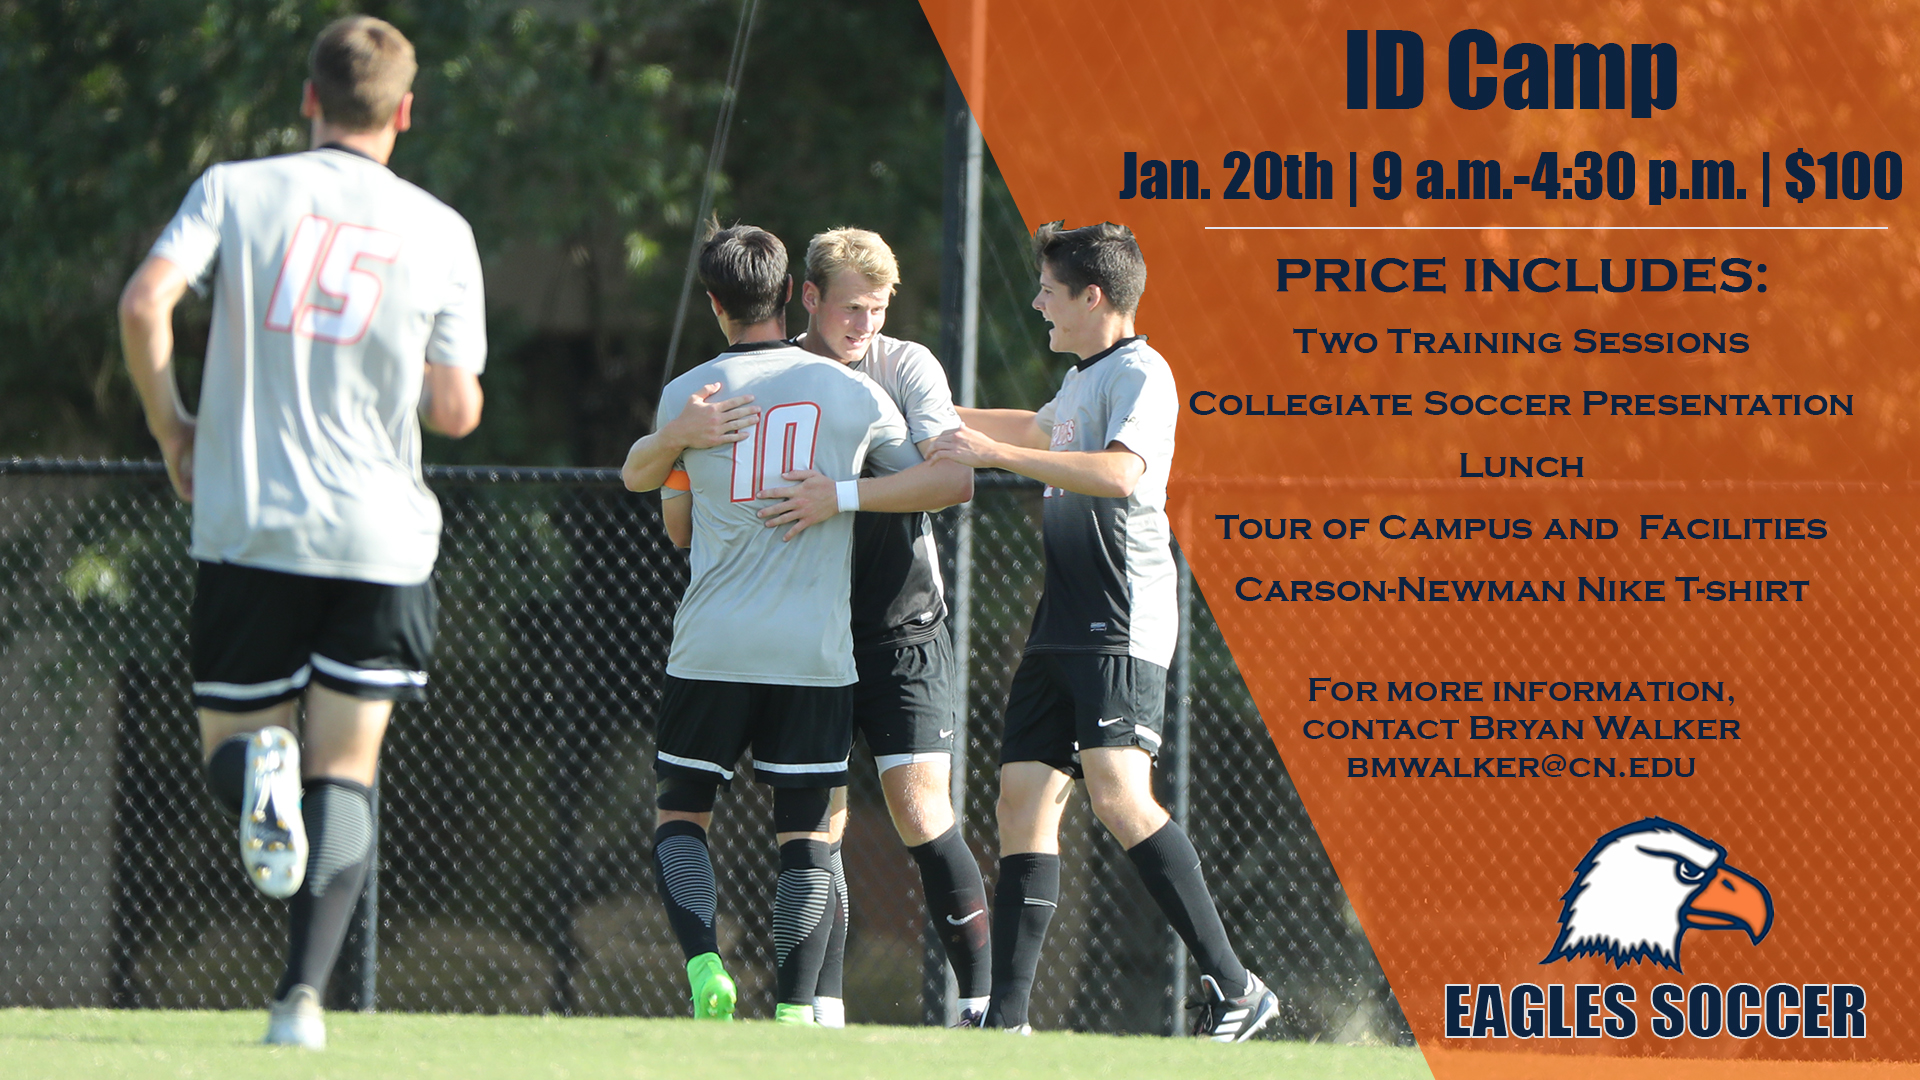 Men's soccer ID Camp scheduled for January